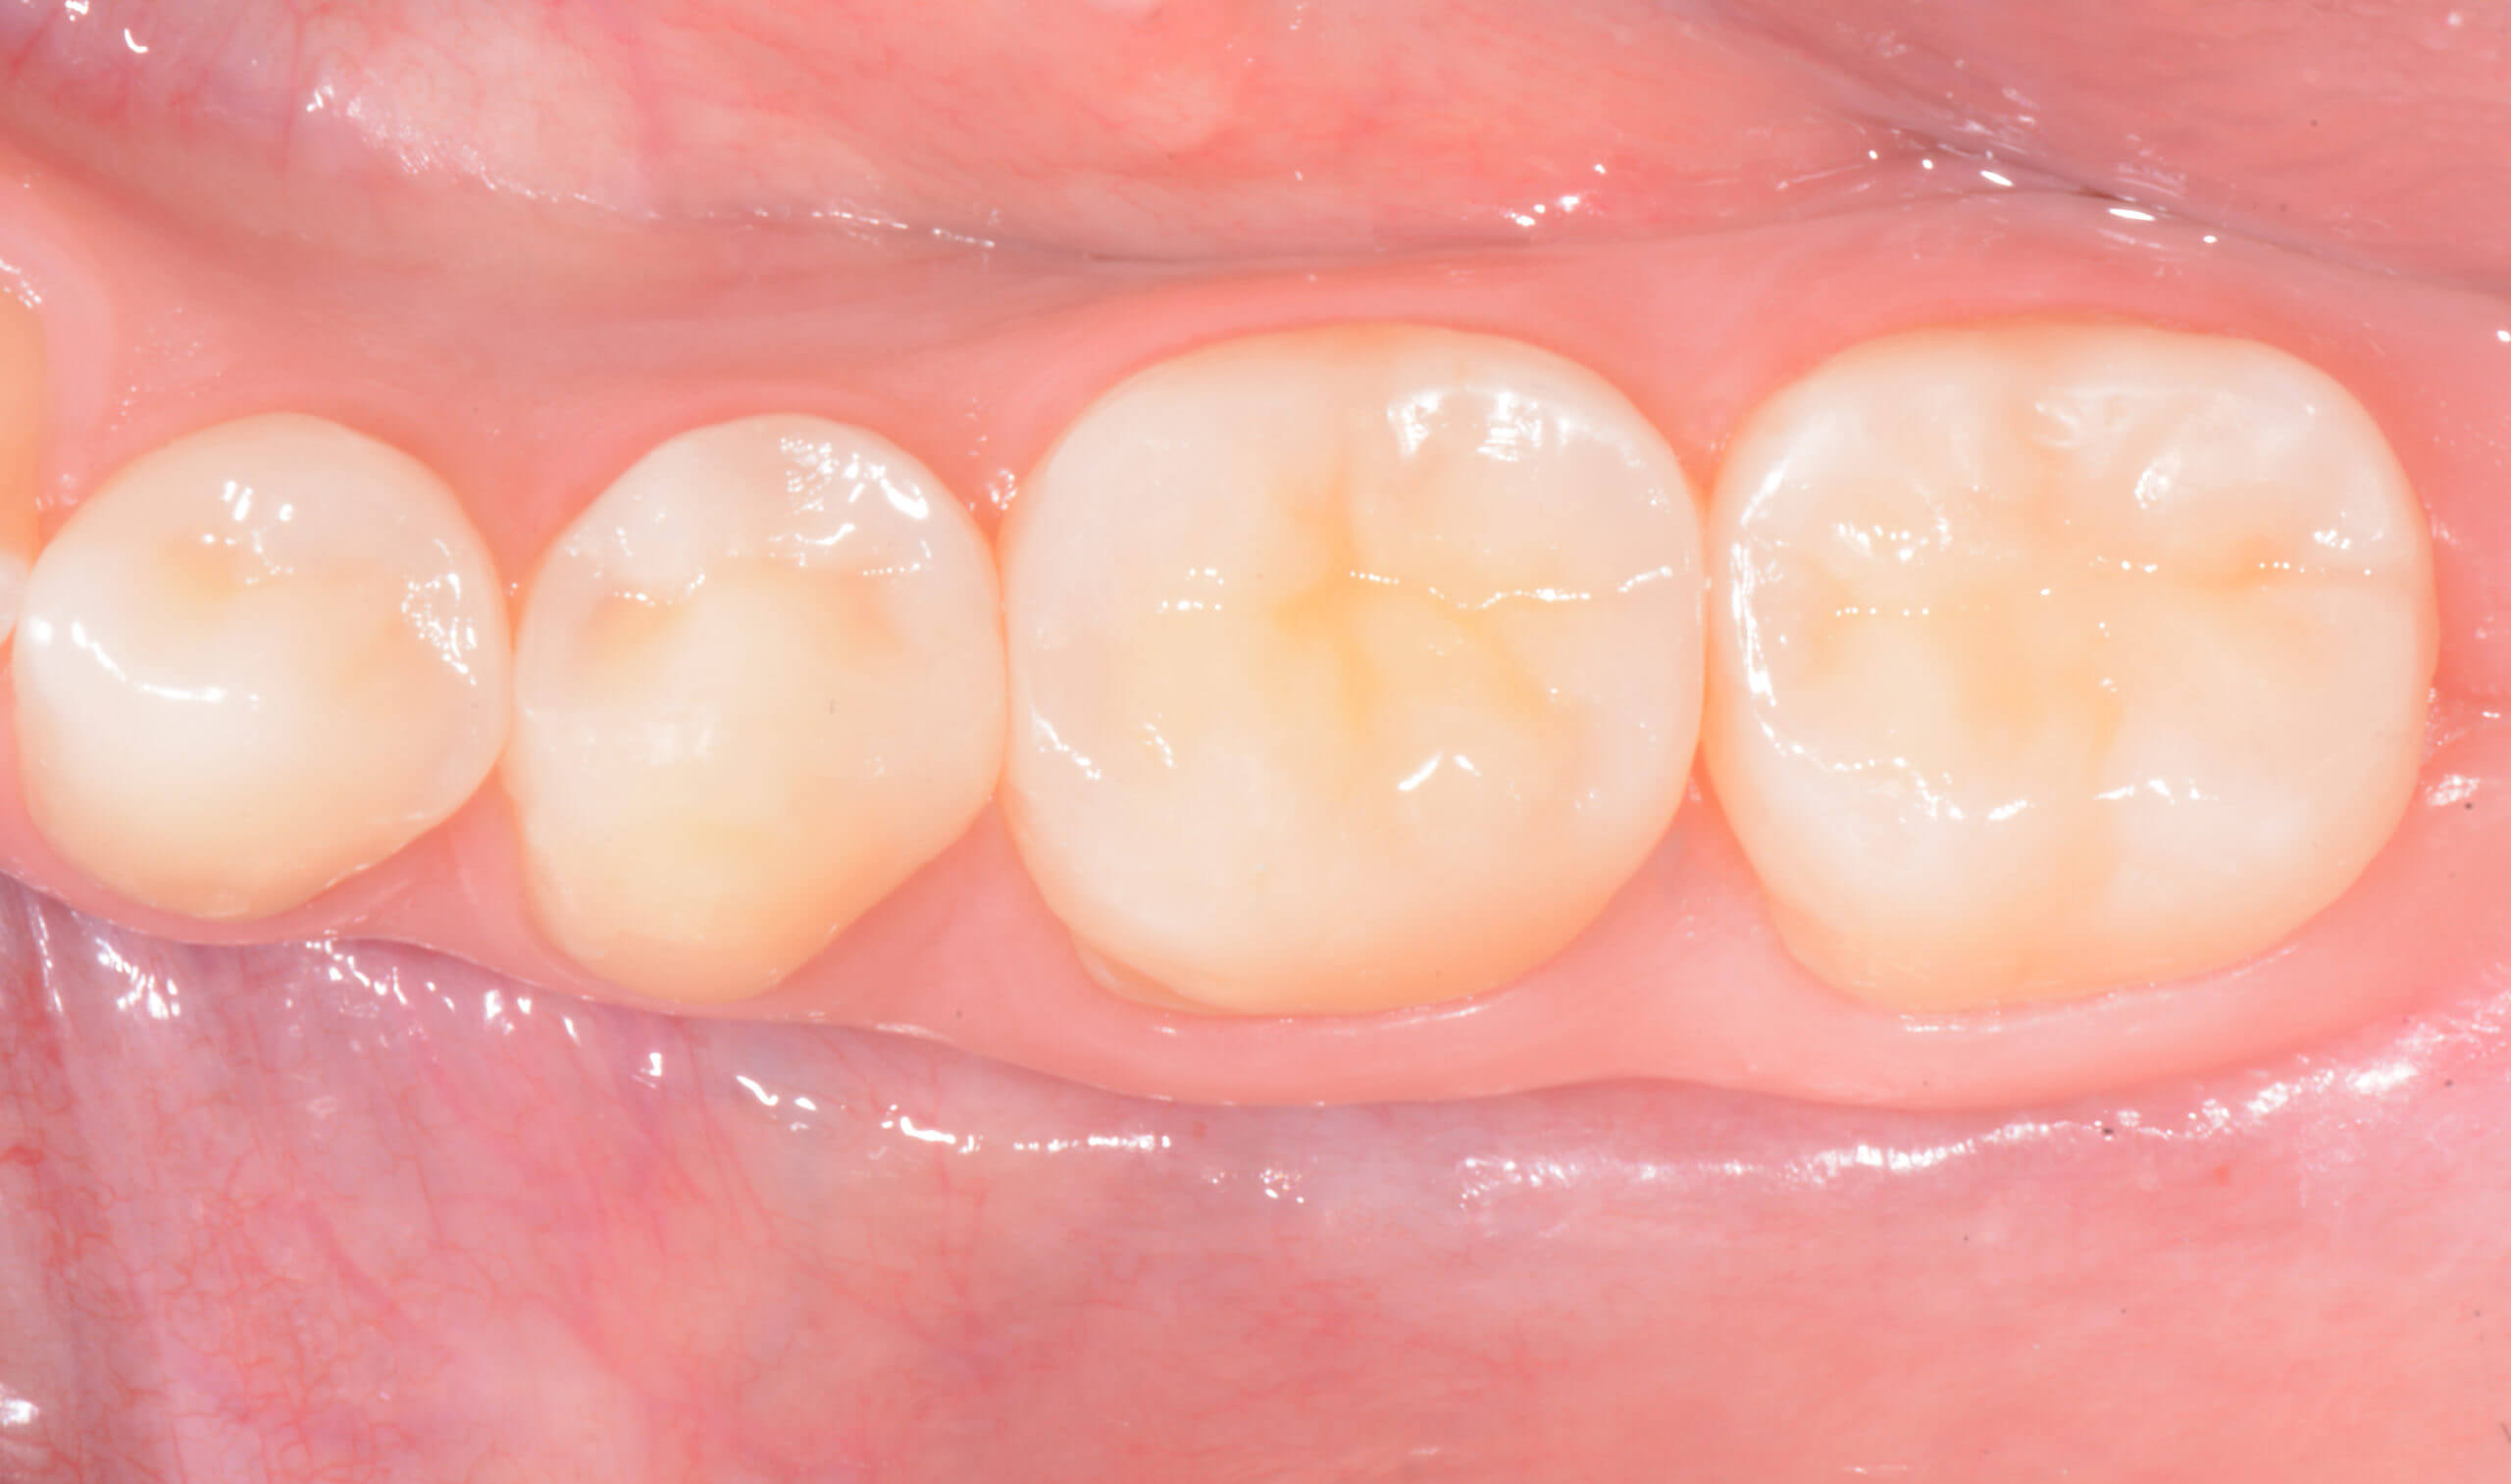 Adhesive Management of Worn Dentition Using the “Index Technique” The DIRECT Approach